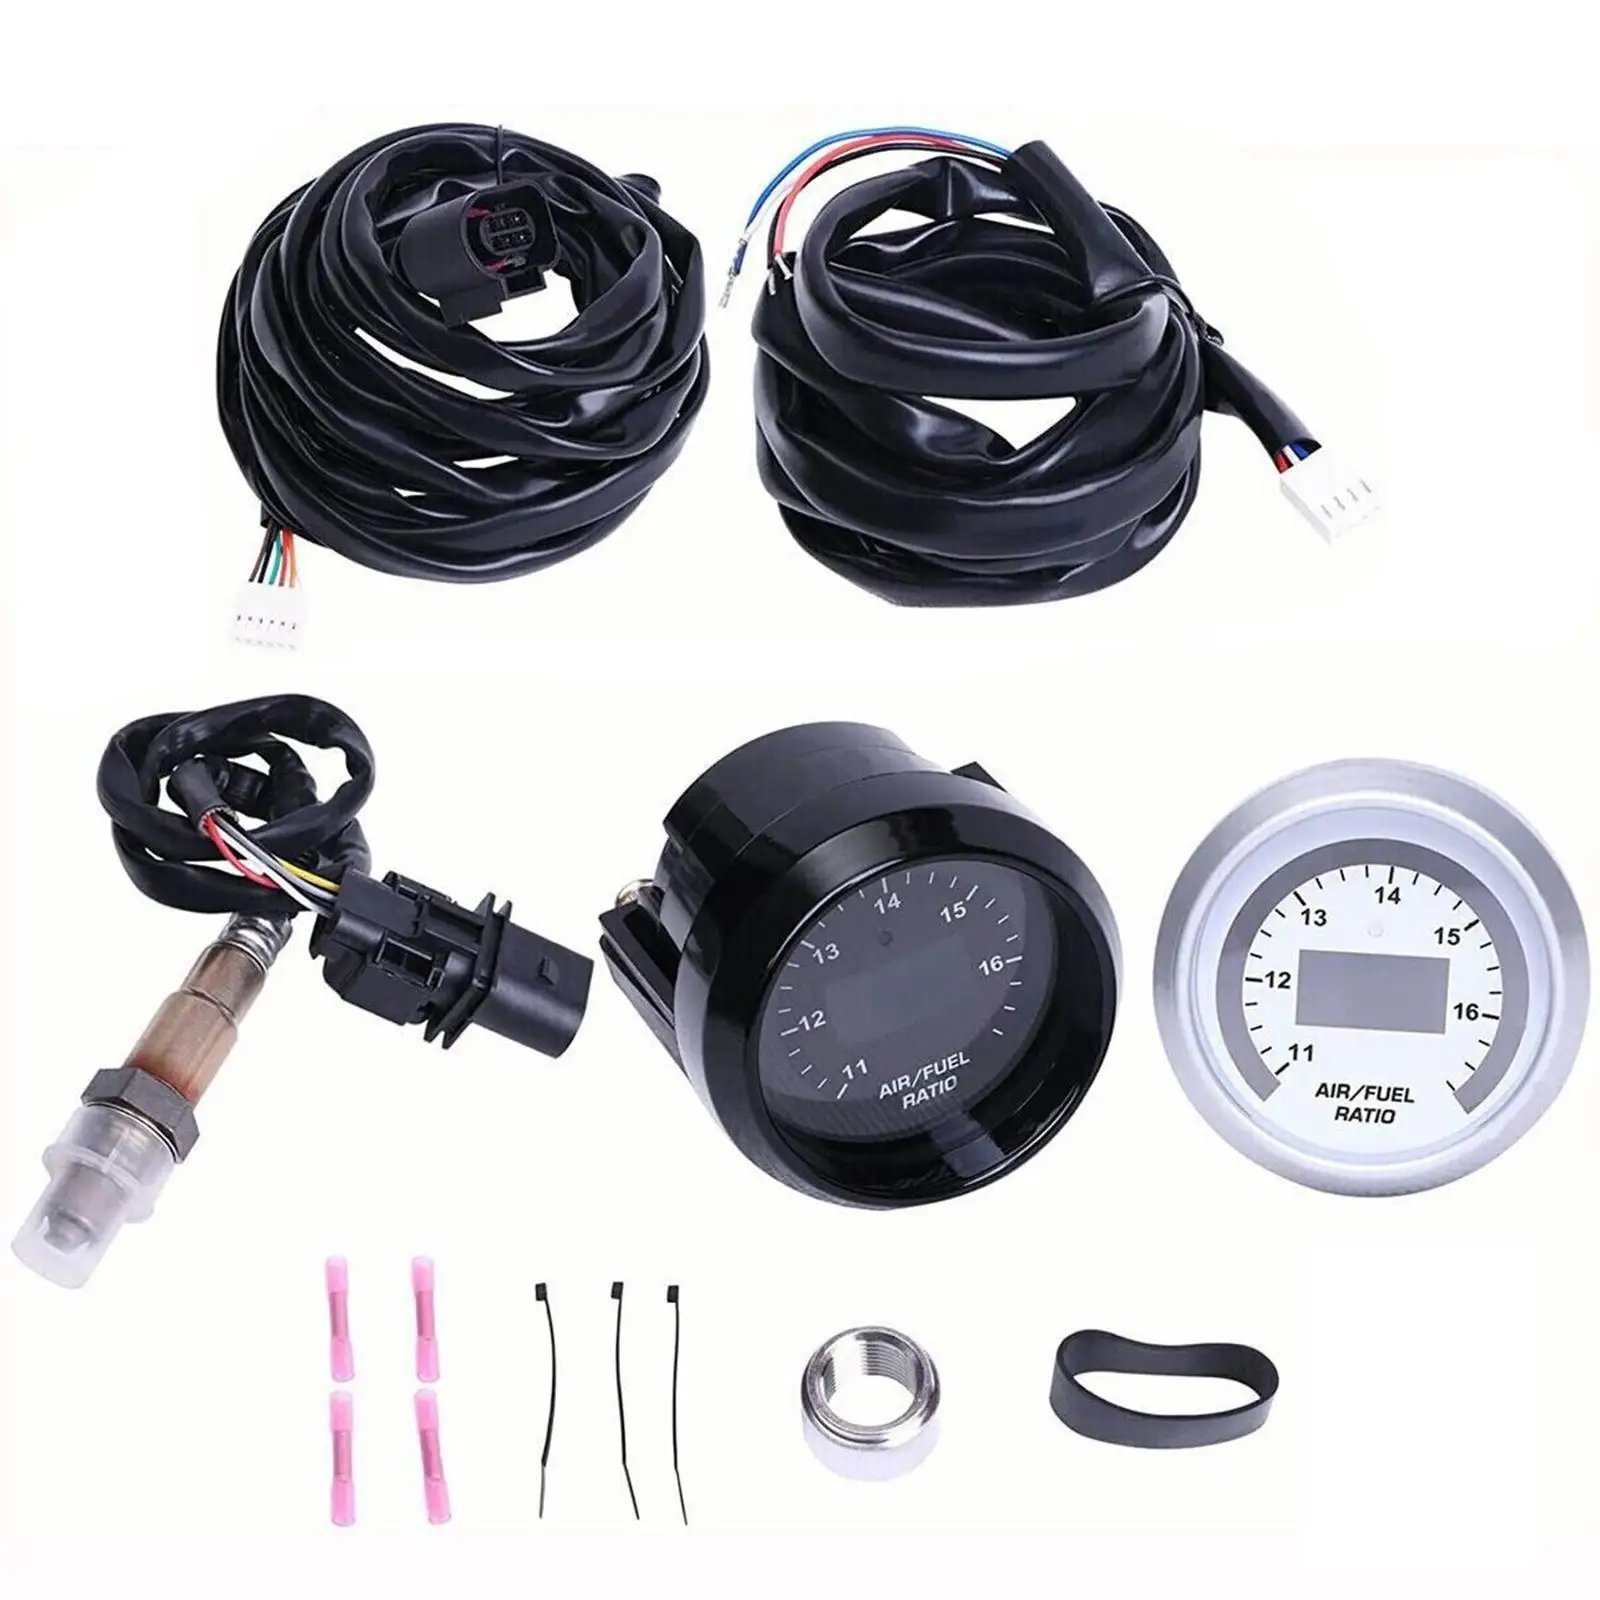 30-4110 Assembly Easy Installation Durable Replaces Air Fuel Ratio Gauge Set